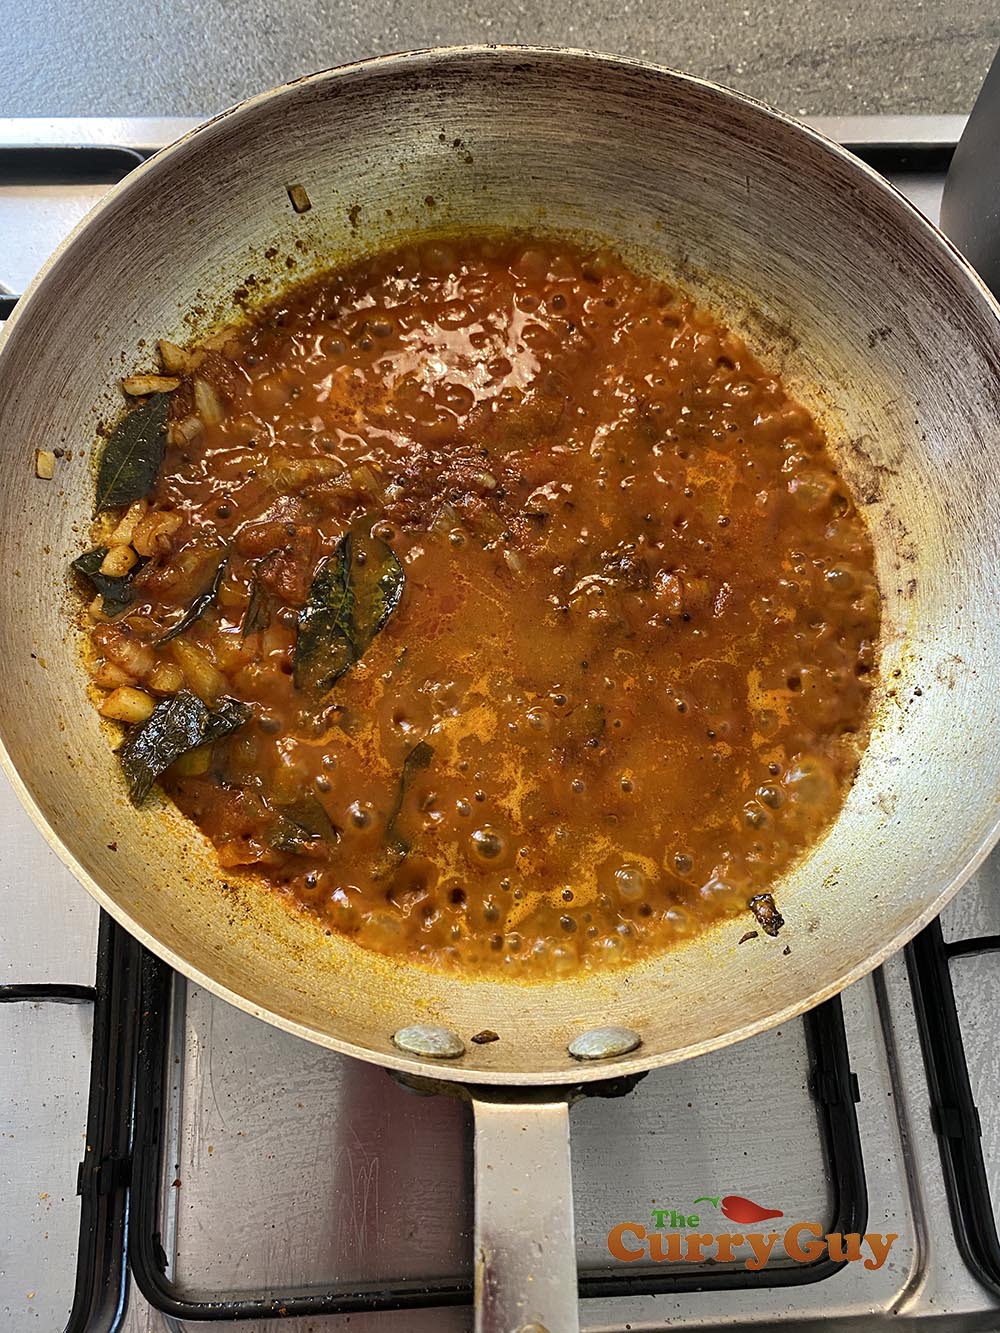 Adding base sauce to the curry